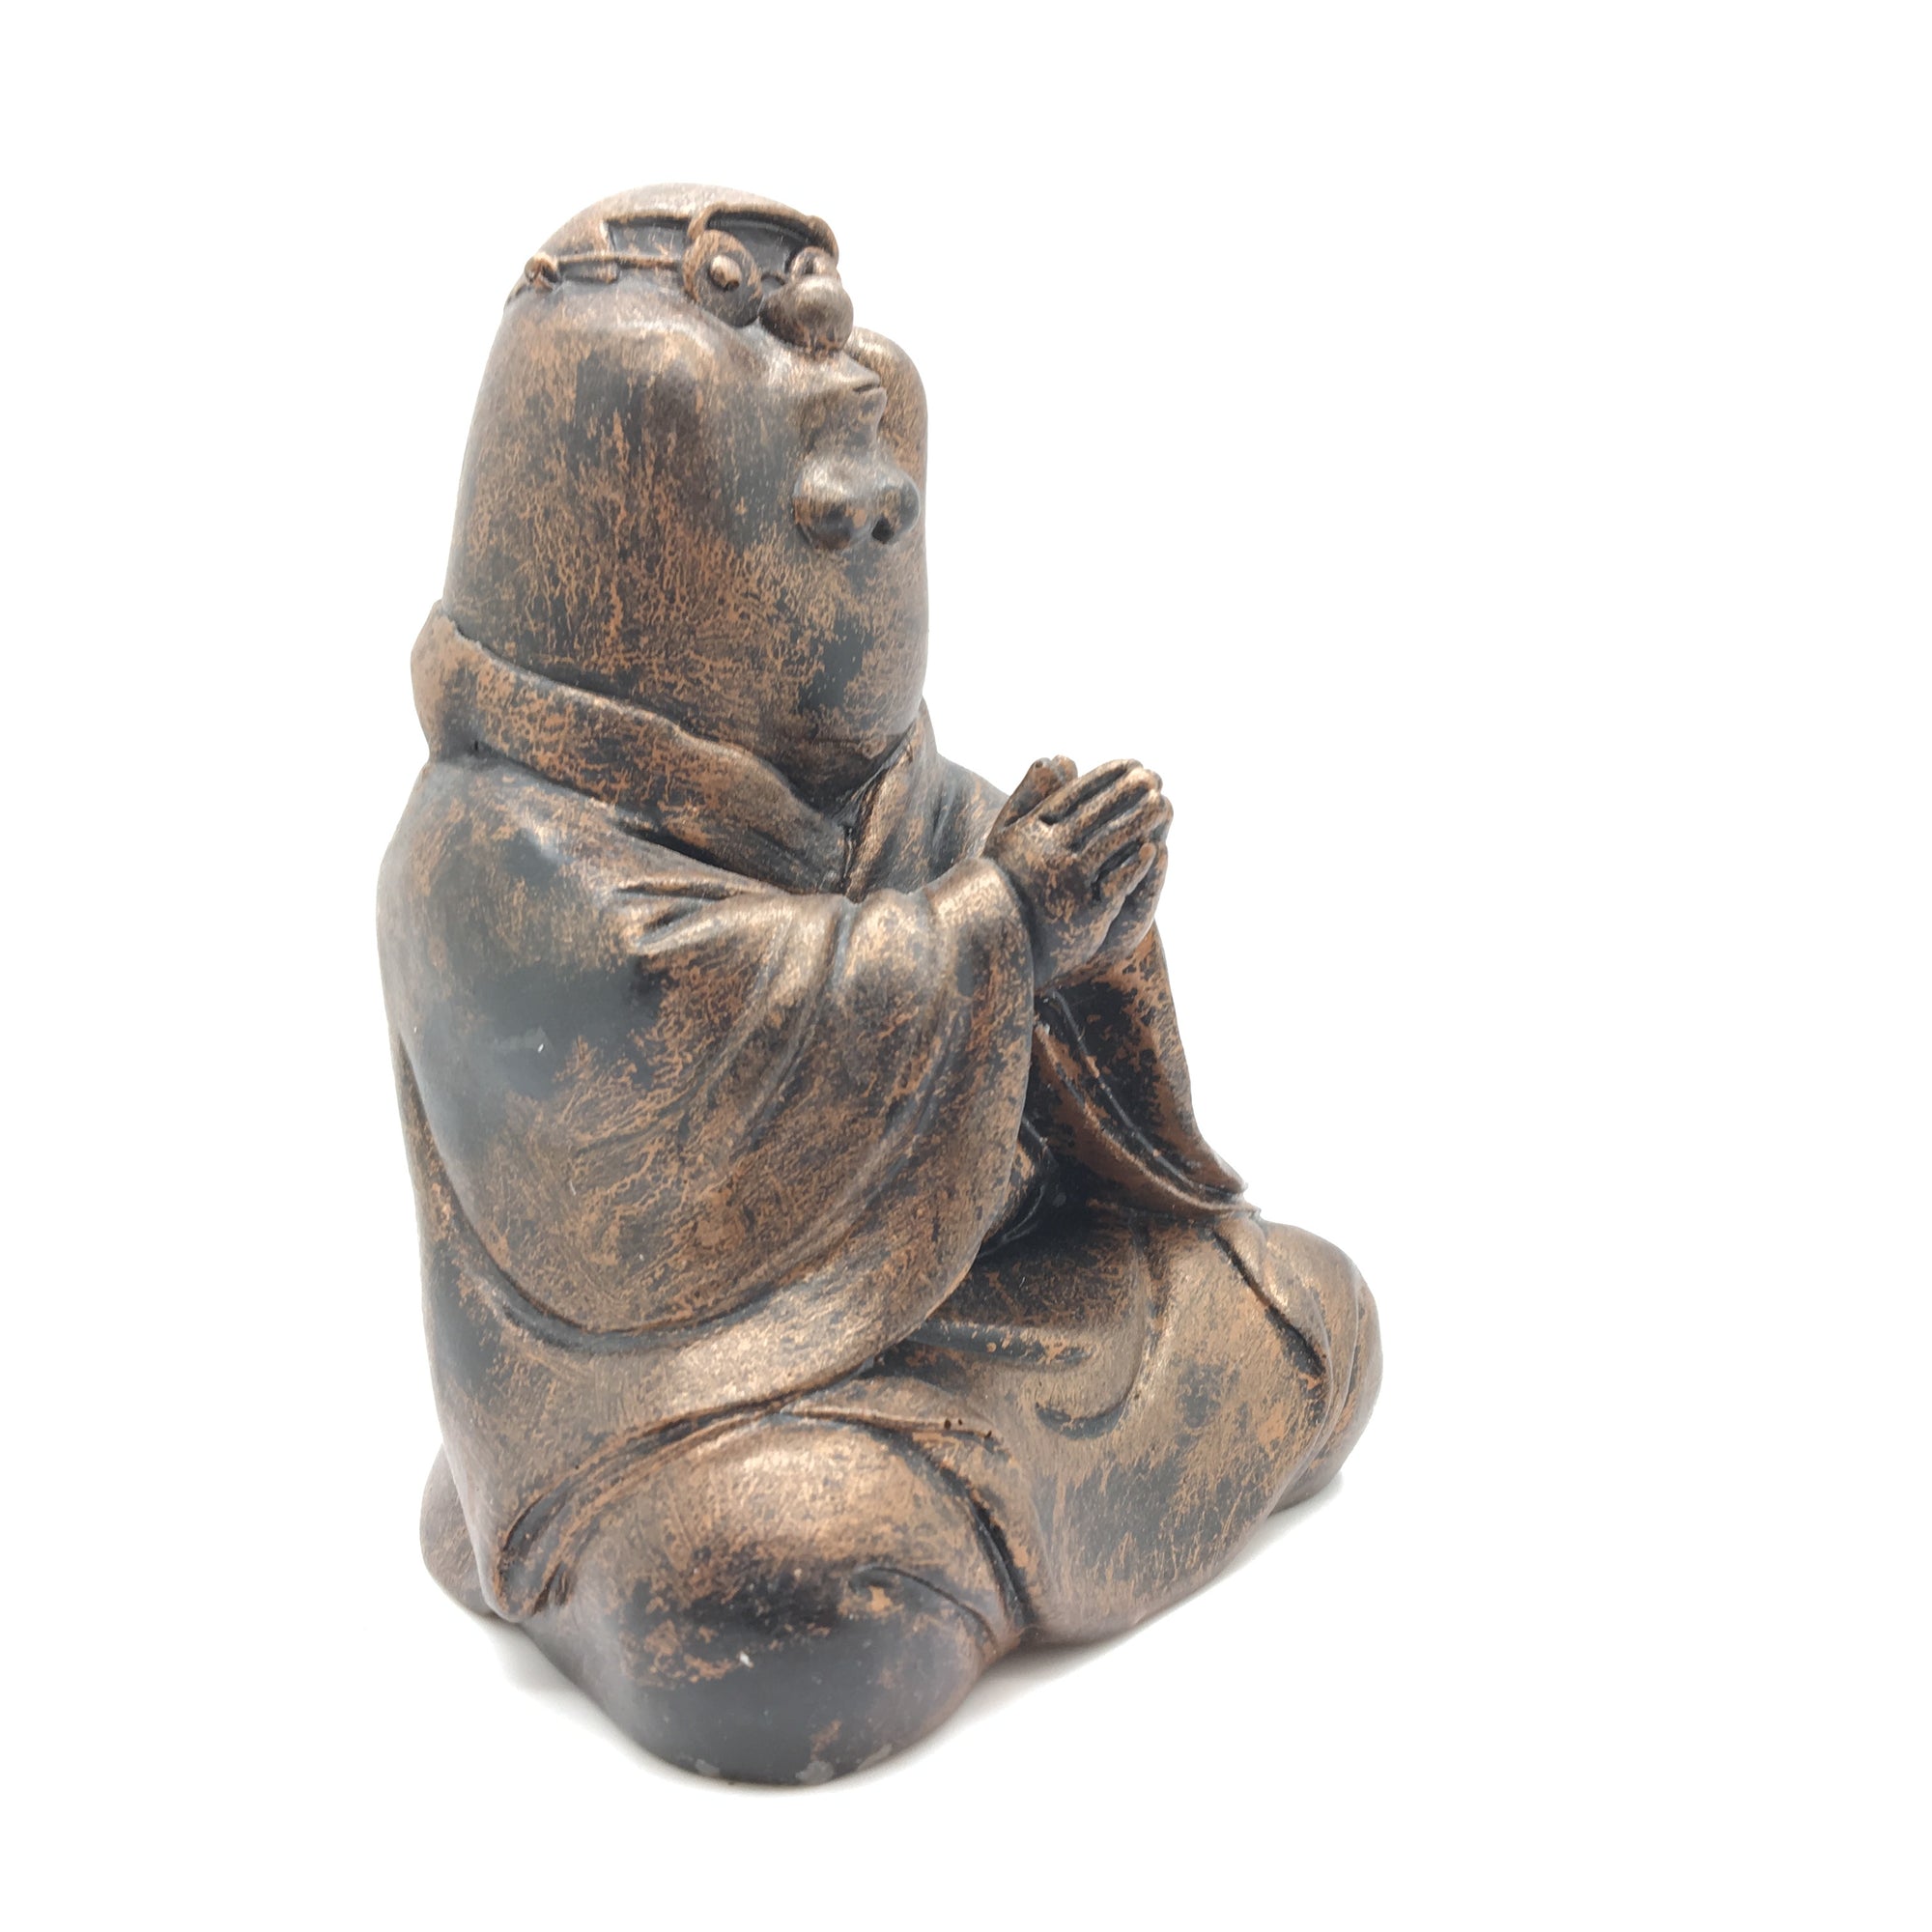 Peter Griffin Buddha Bronze by Modulicious